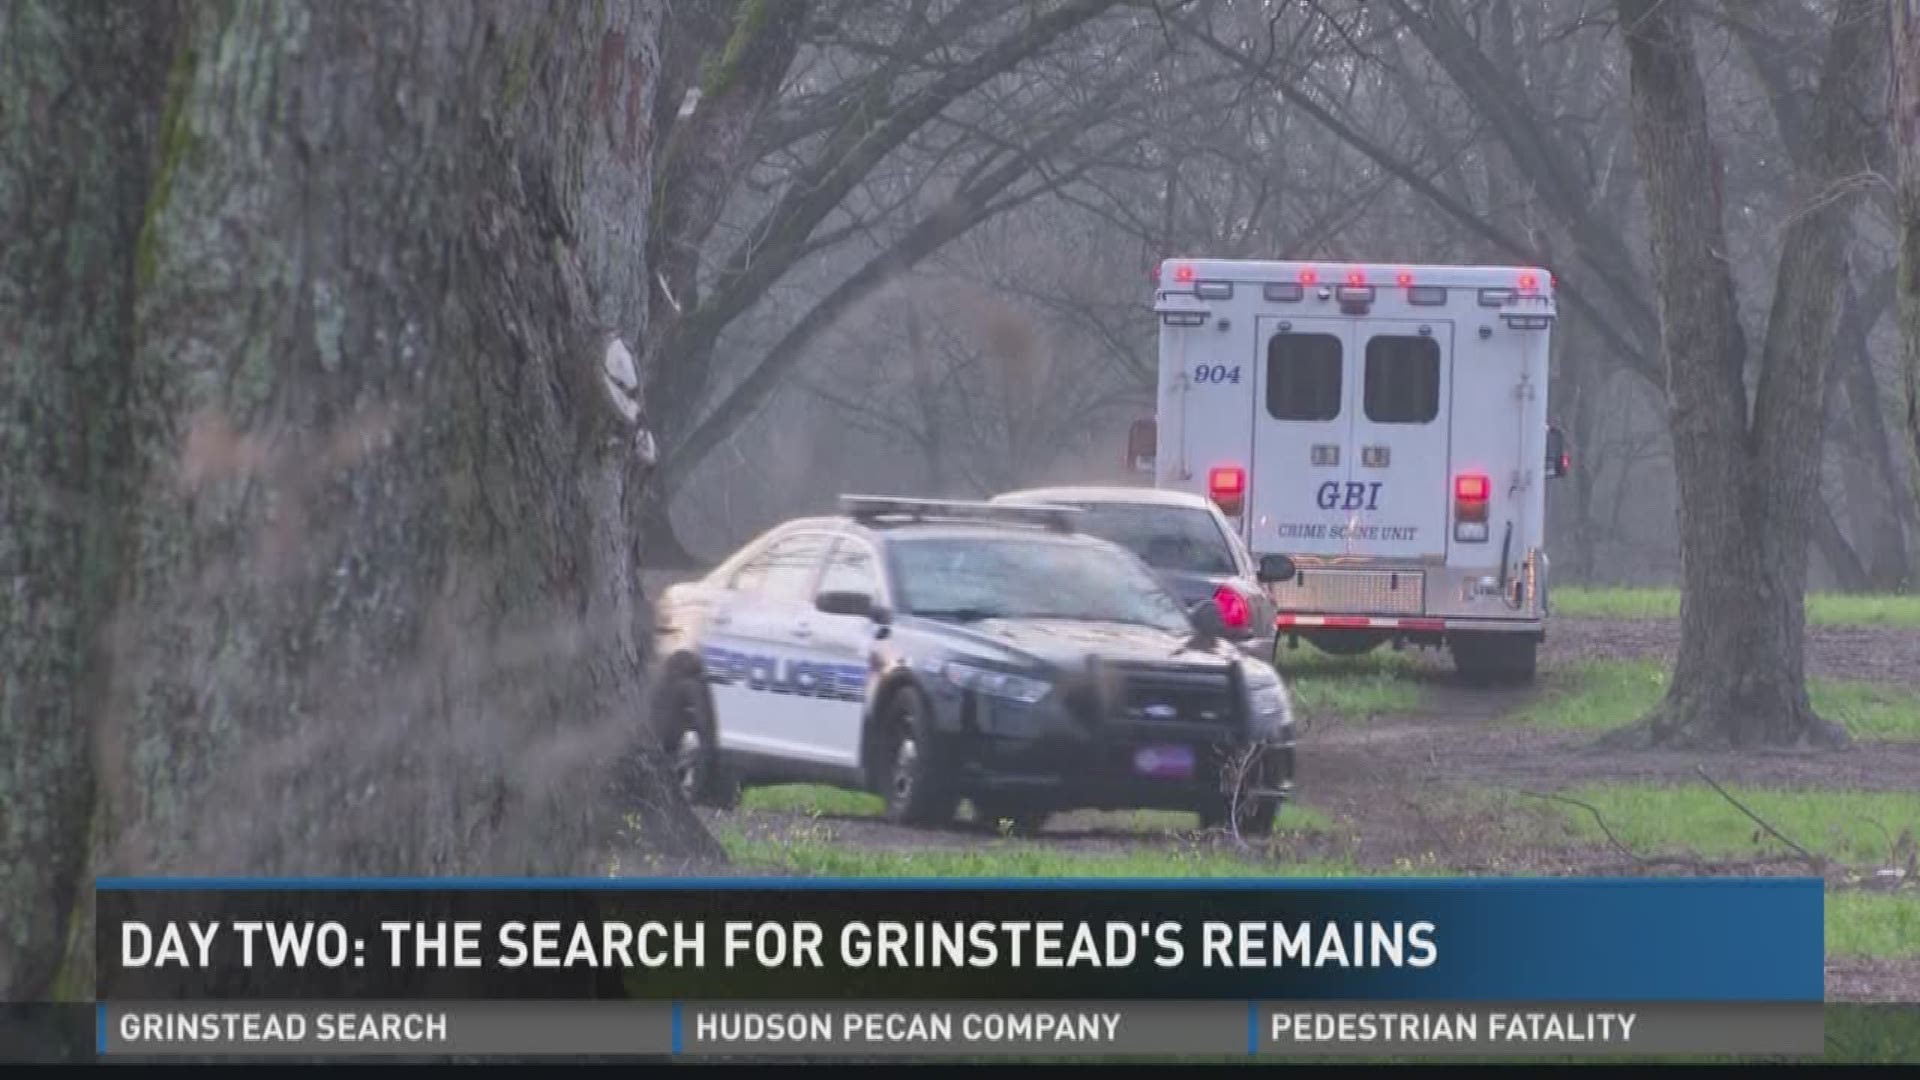 Day 2 in the search for Grinstead's remains